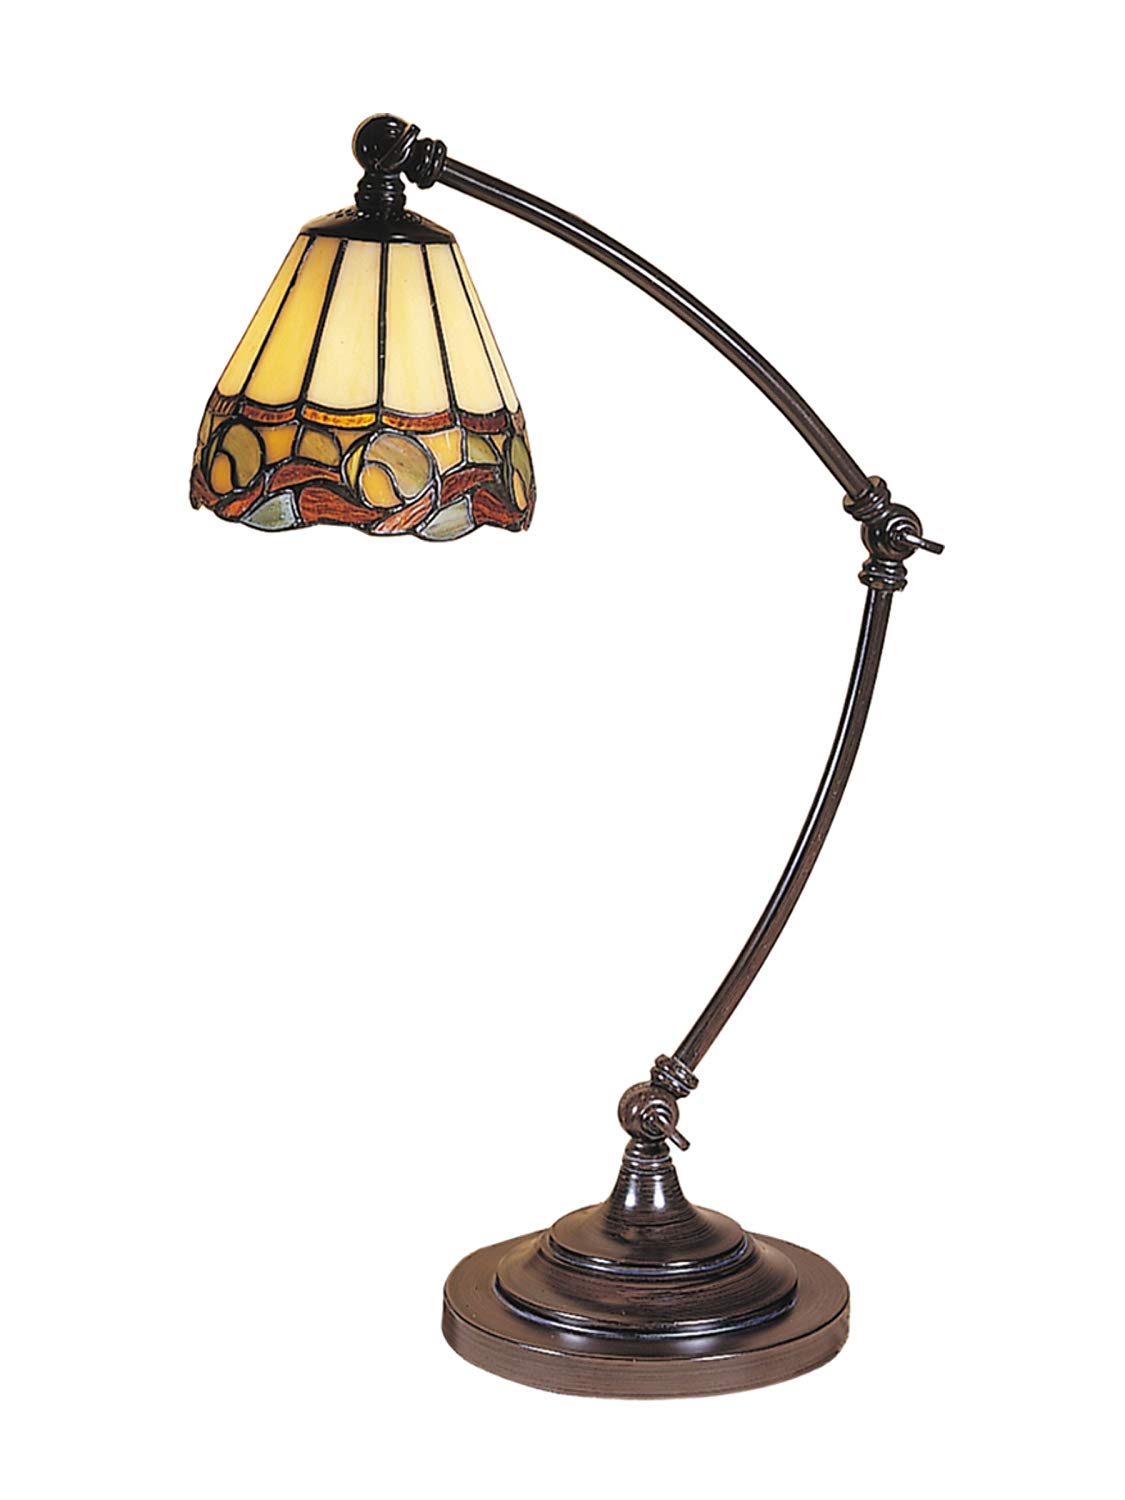 dale tiffany ainsley desk lamp mica accent table lamps bronze coffee tray ideas inexpensive end tables for living room office furniture portland kijiji bar teal corner small brass